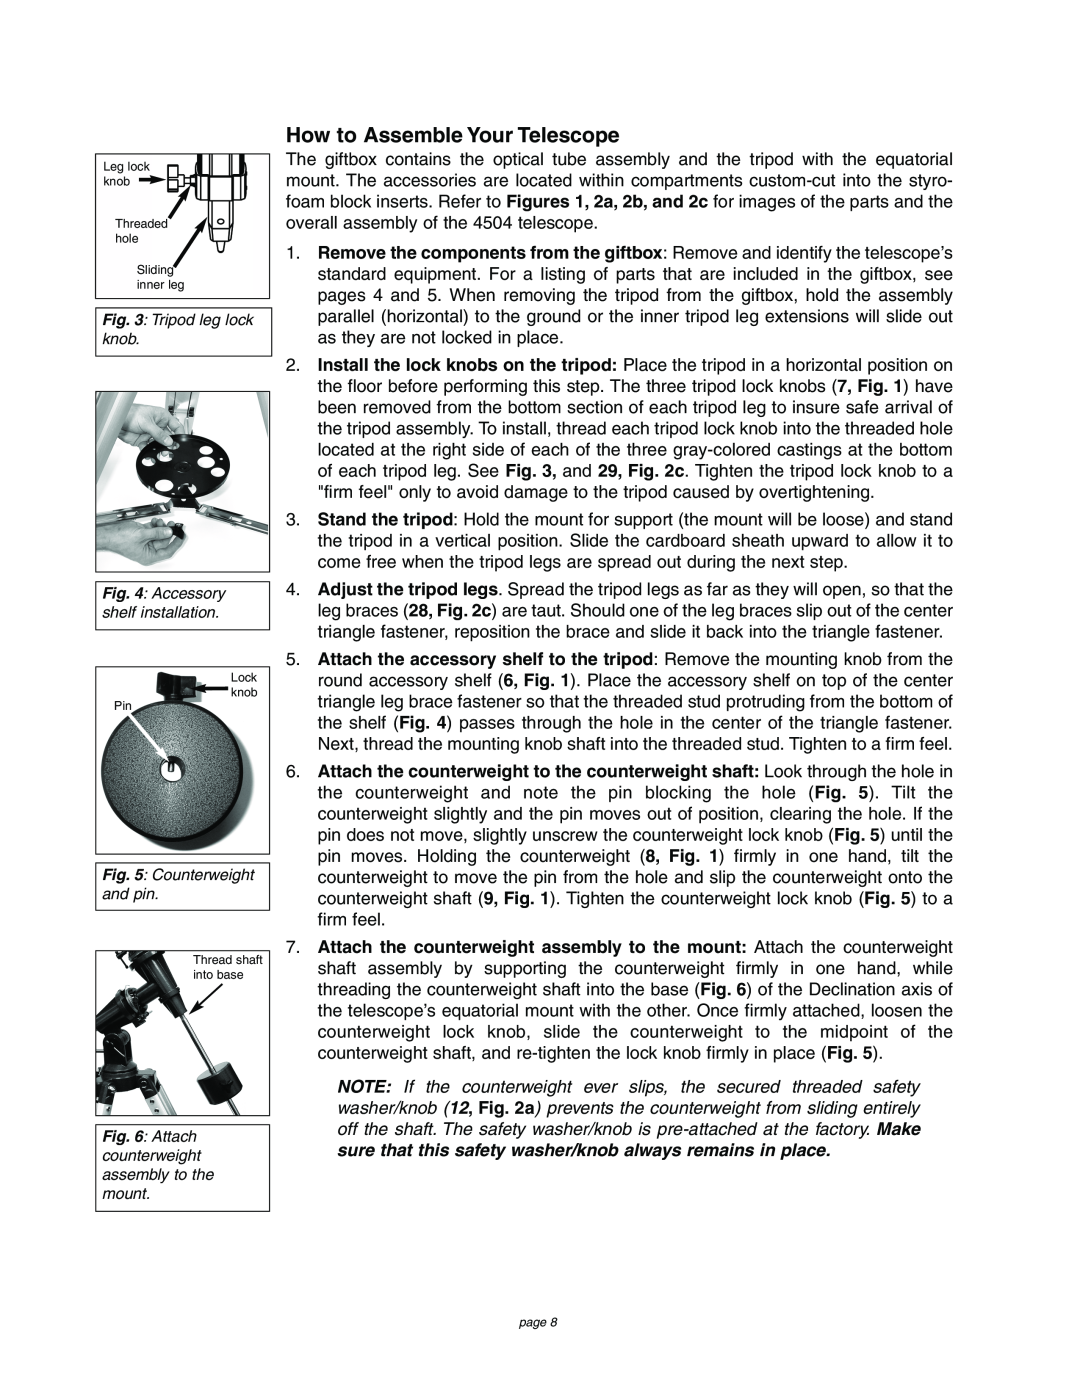 Meade 4504 instruction manual How to Assemble Your Telescope, sure that this safety washer/knob always remains in place 